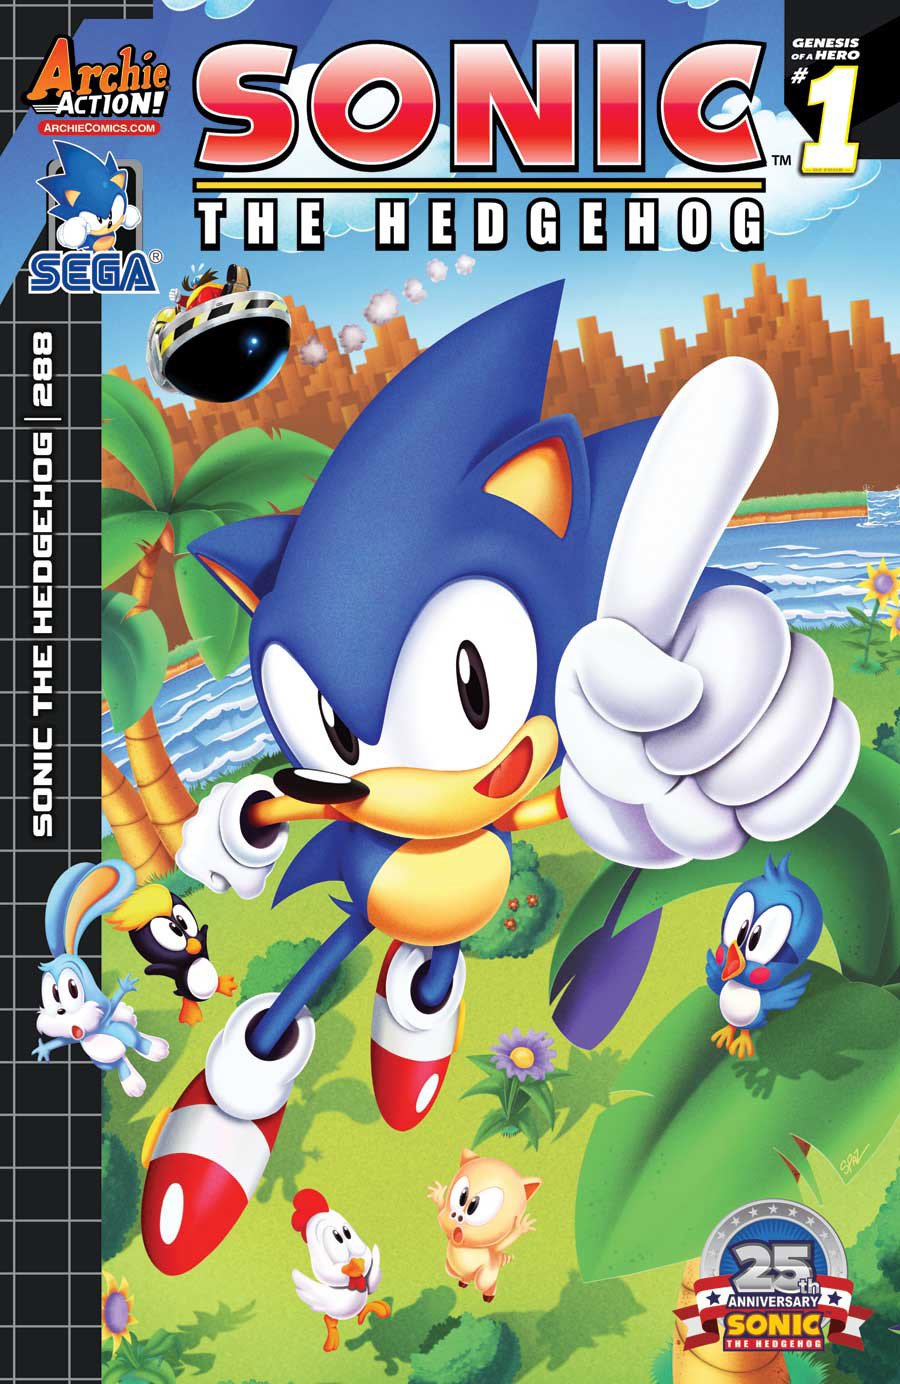 How old is Classic Sonic?